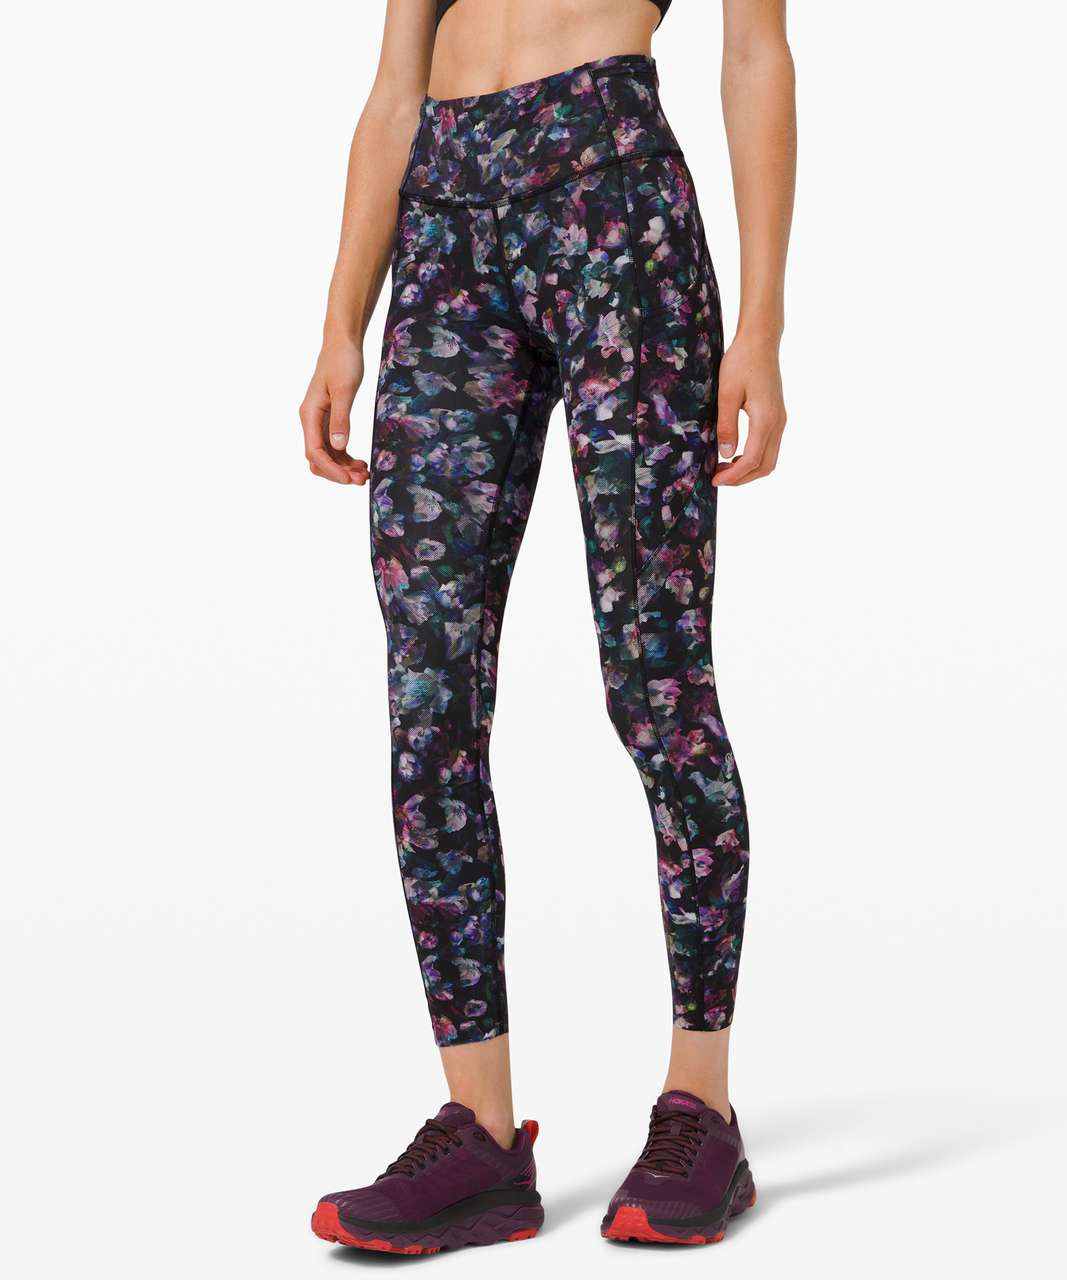 Lululemon Fast and Free Tight II 25" *Non-Reflective Nulux - Activate Floral Multi